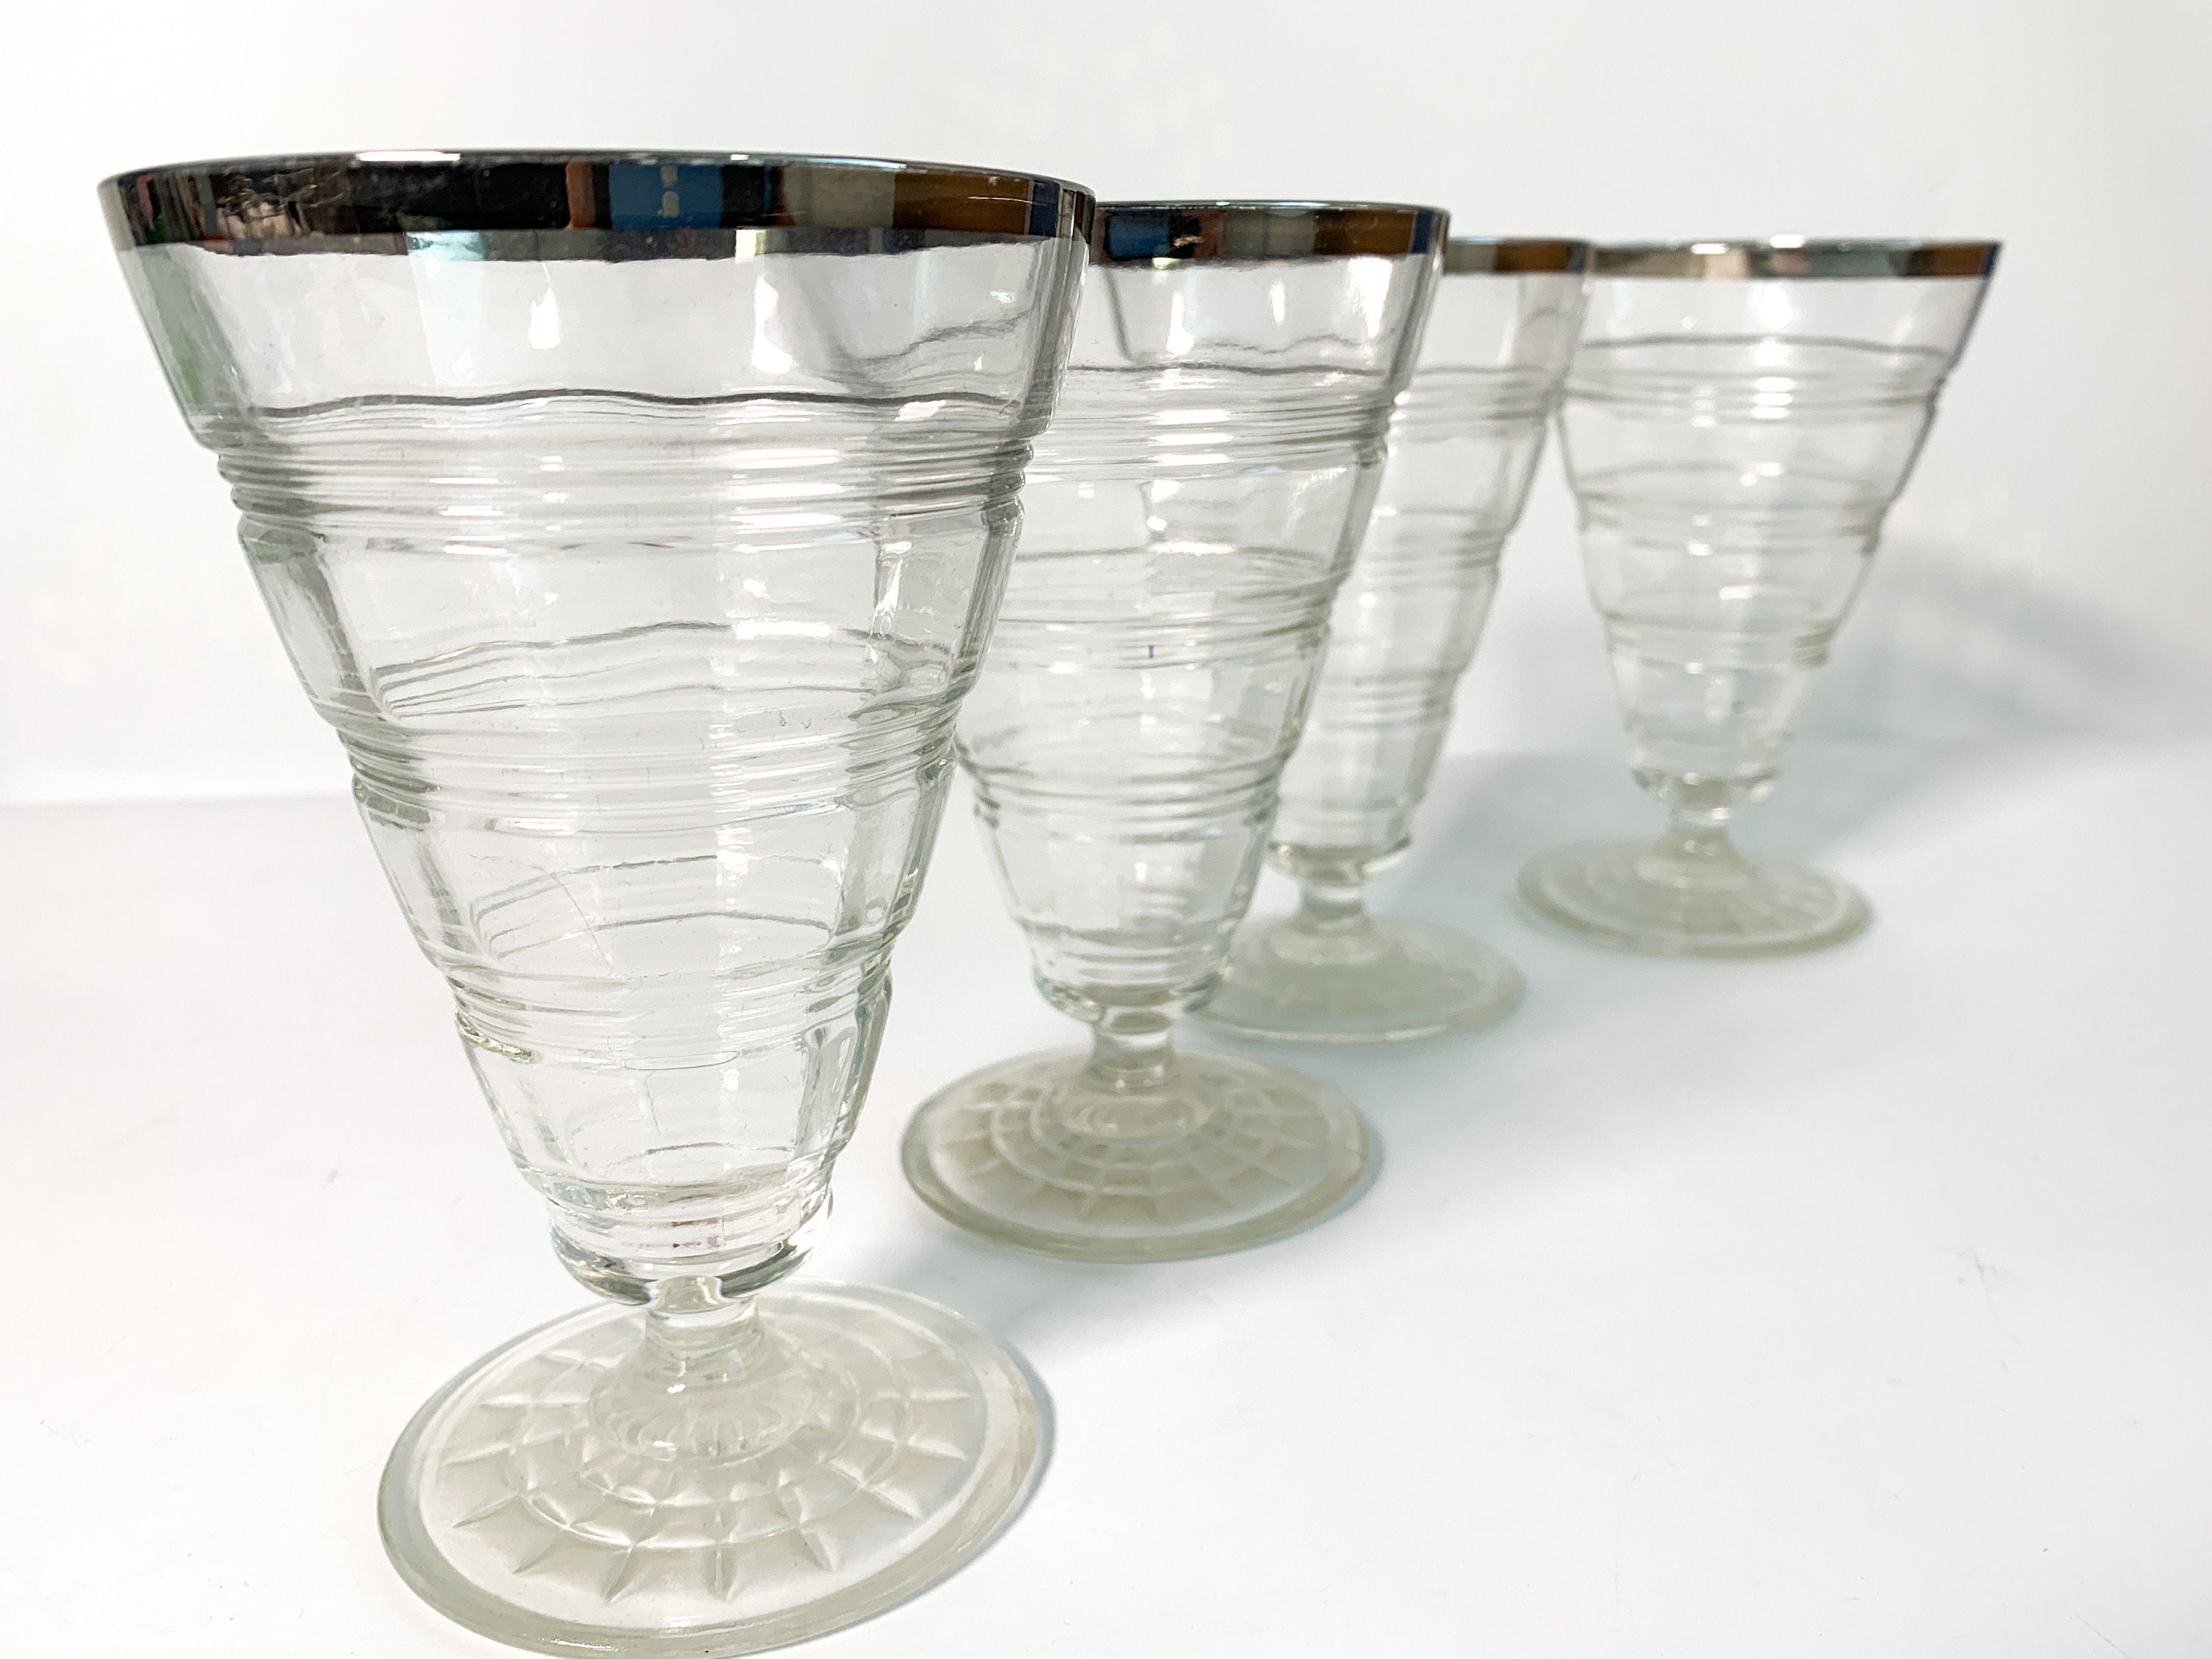 4 Vintage Banded Rings 10 Oz Footed Platinum Tumblers By